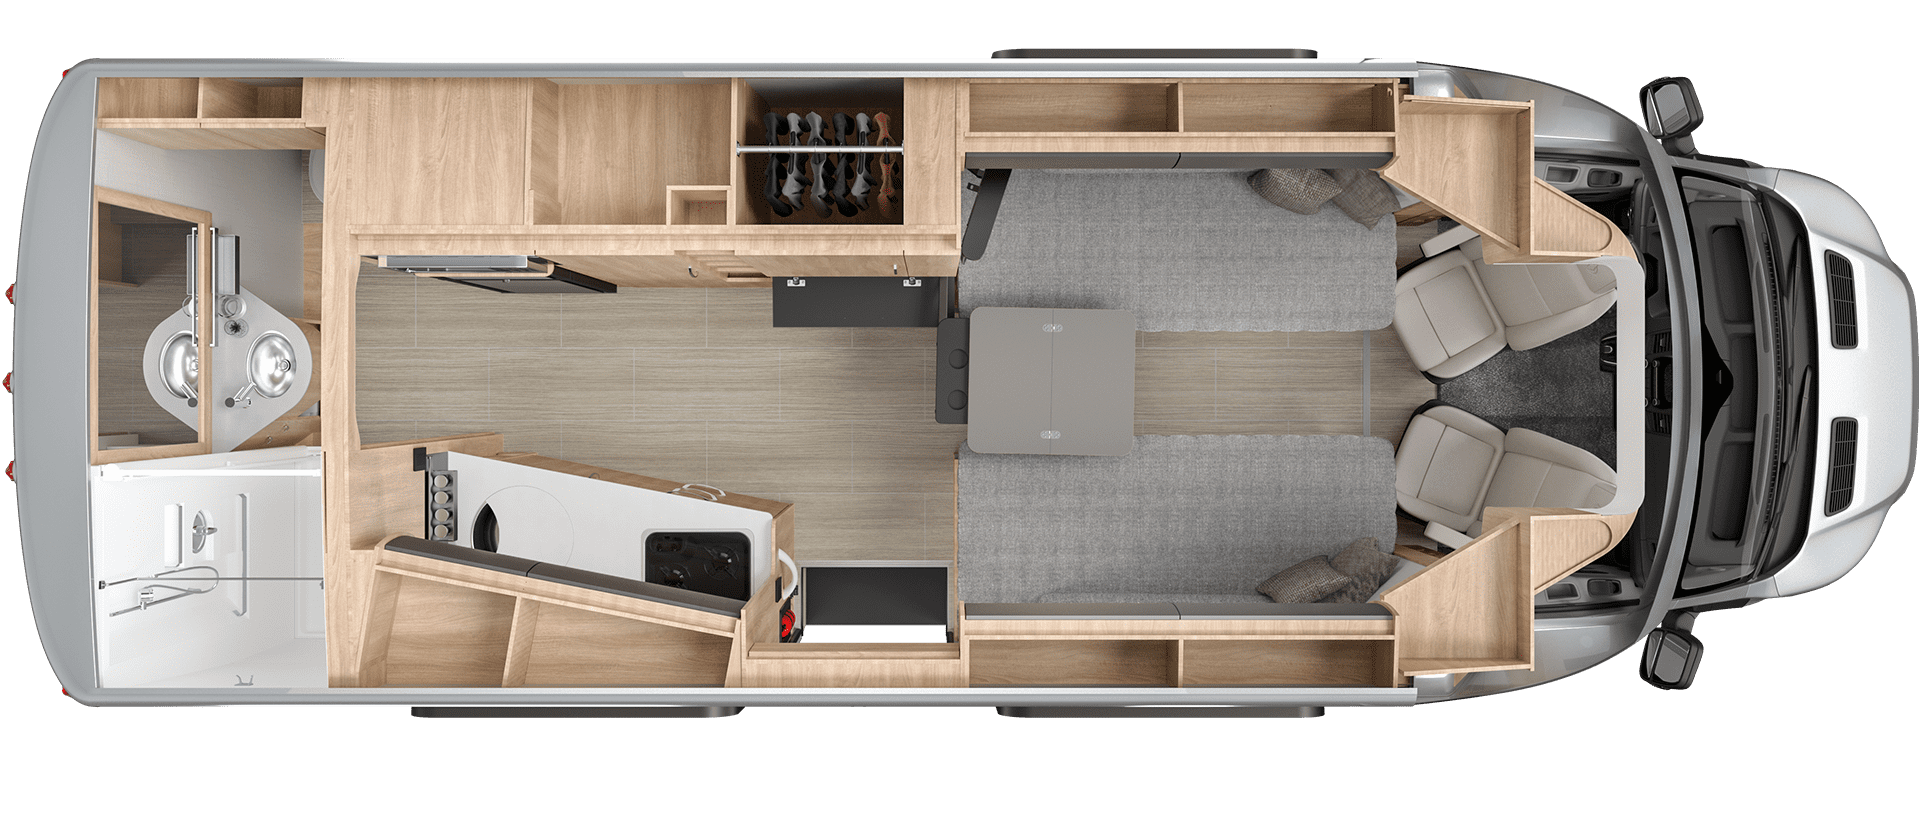 2019 ford wonder murphy bed